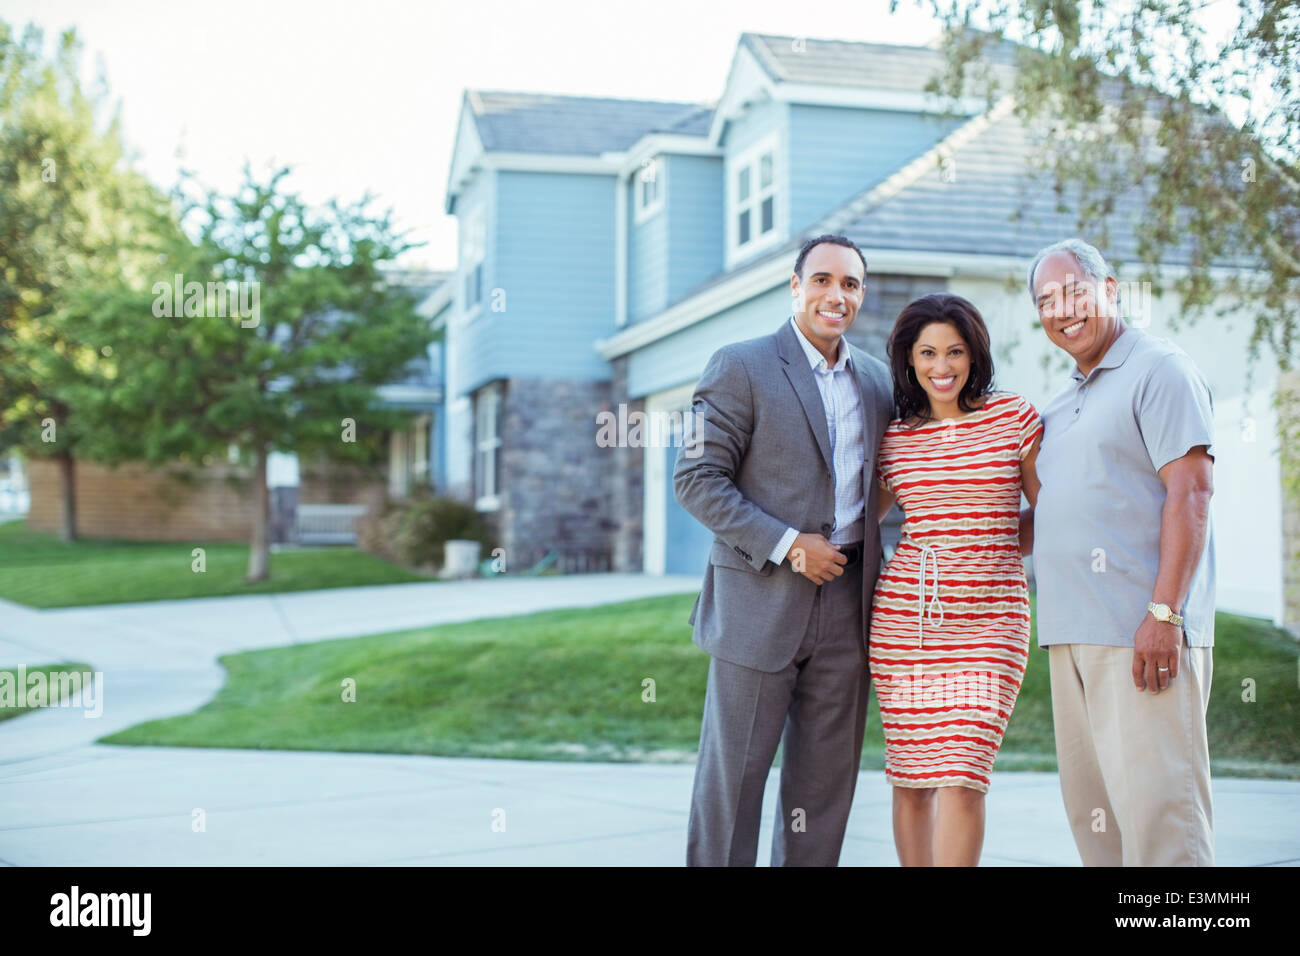 Portrait of smiling family in driveway Stock Photo